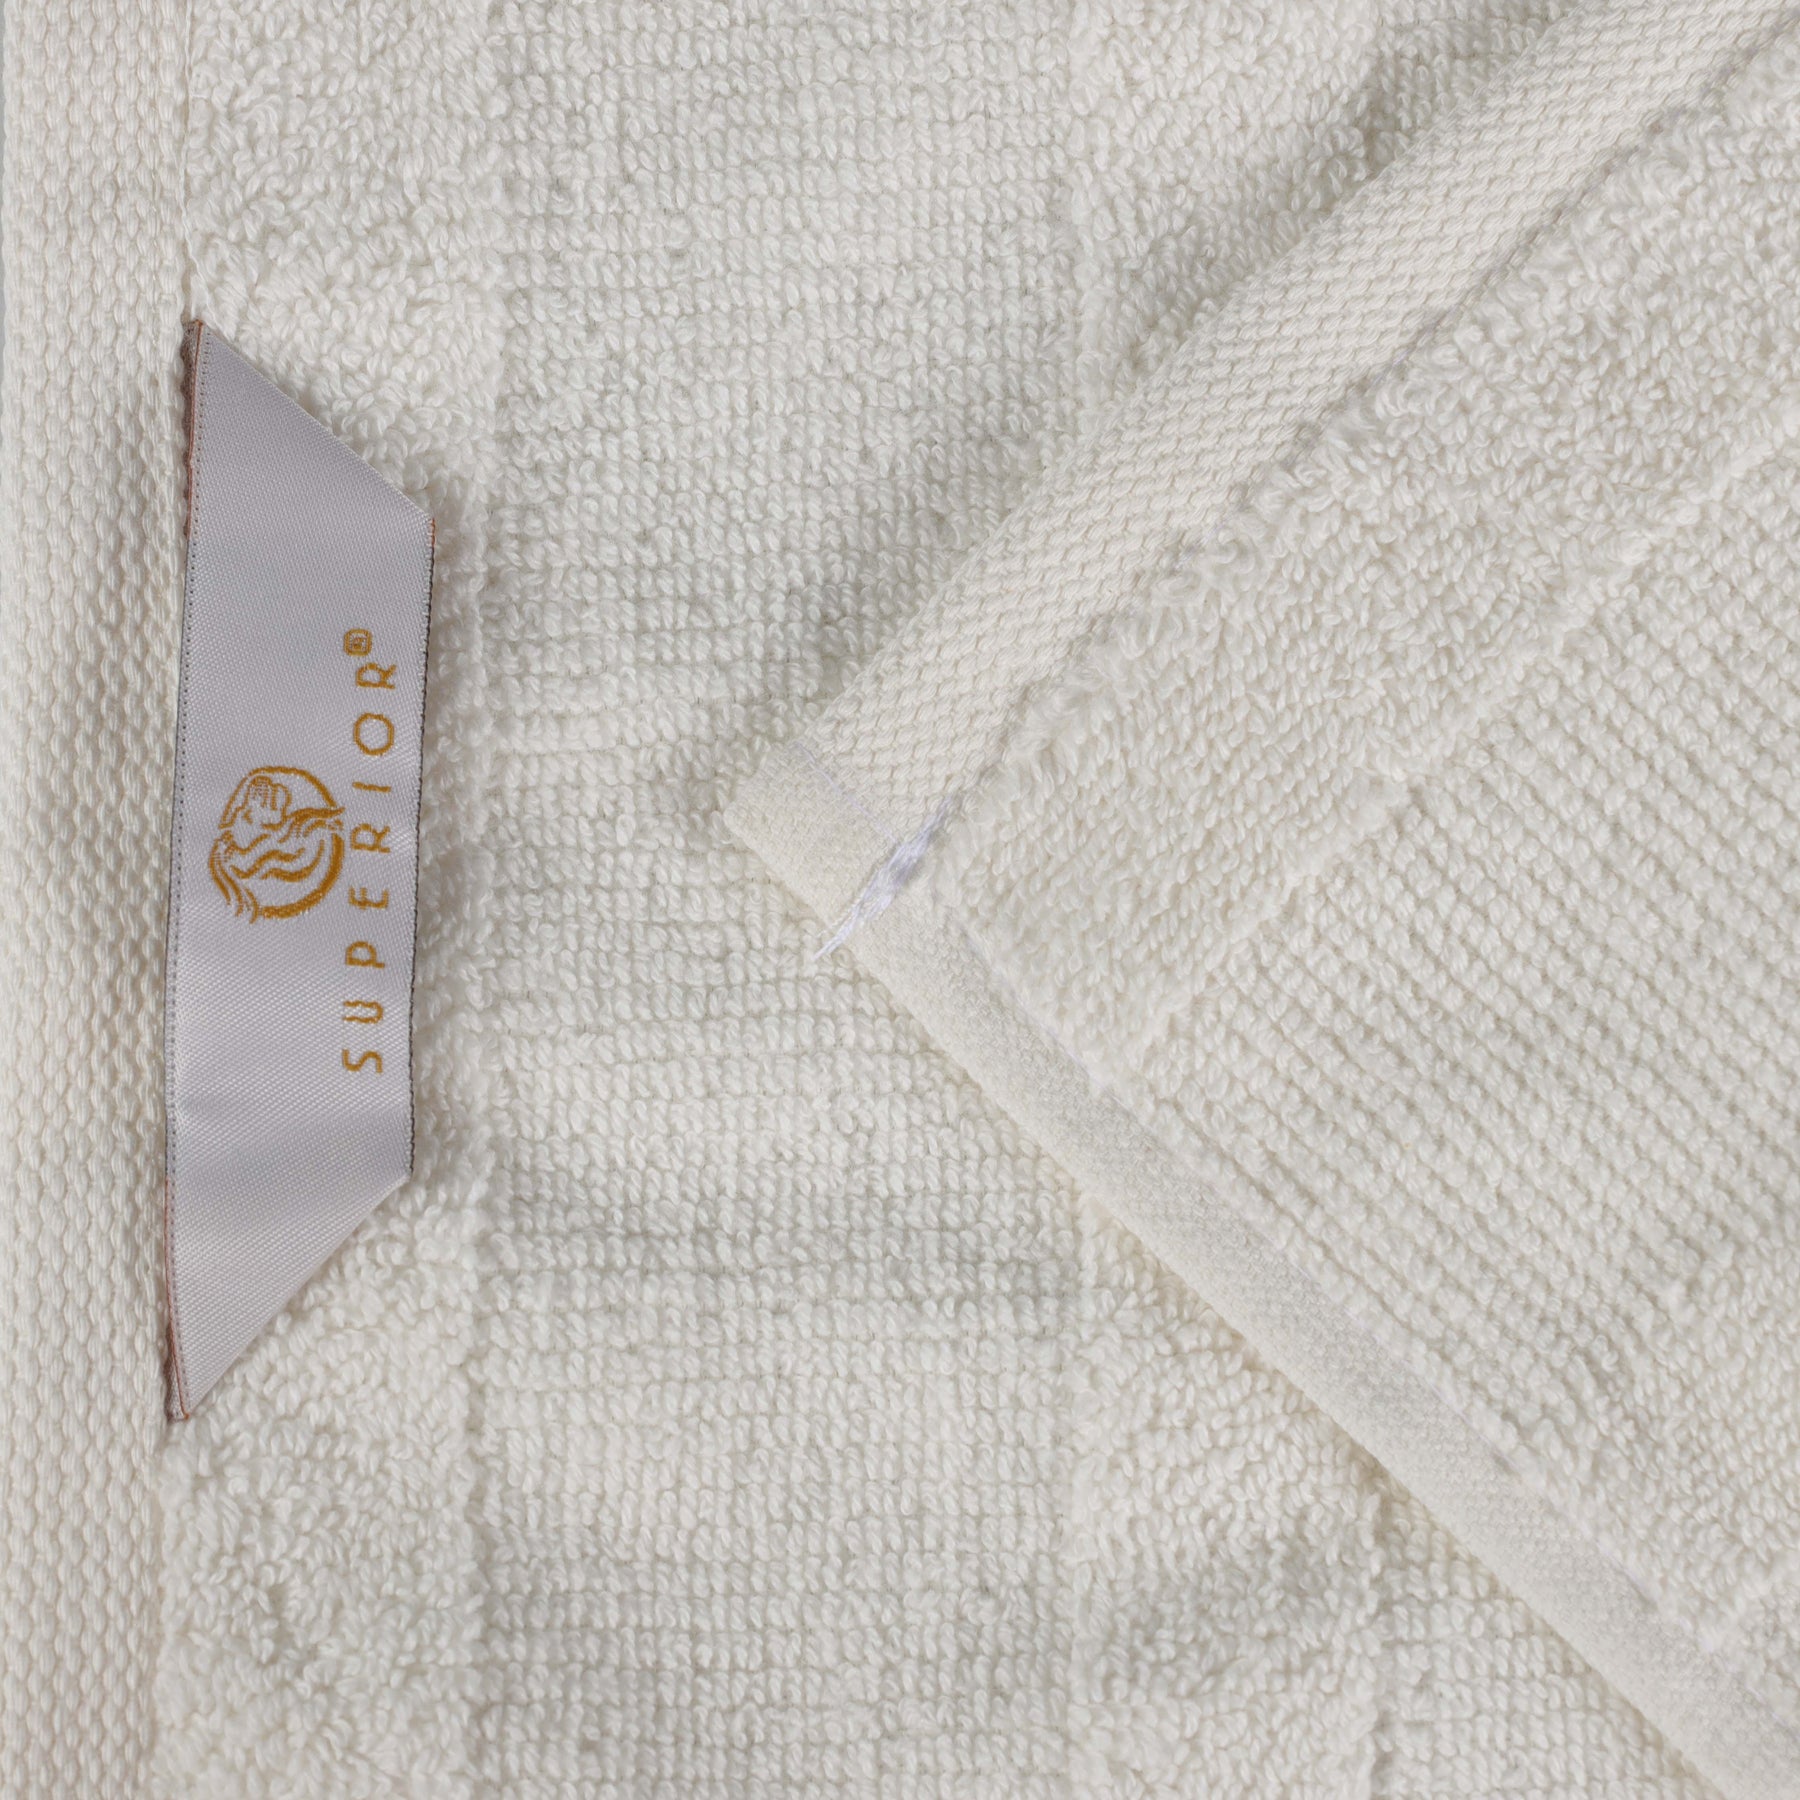 Roma Cotton Ribbed Textured Soft Highly Absorbent Hand Towel - Ivory